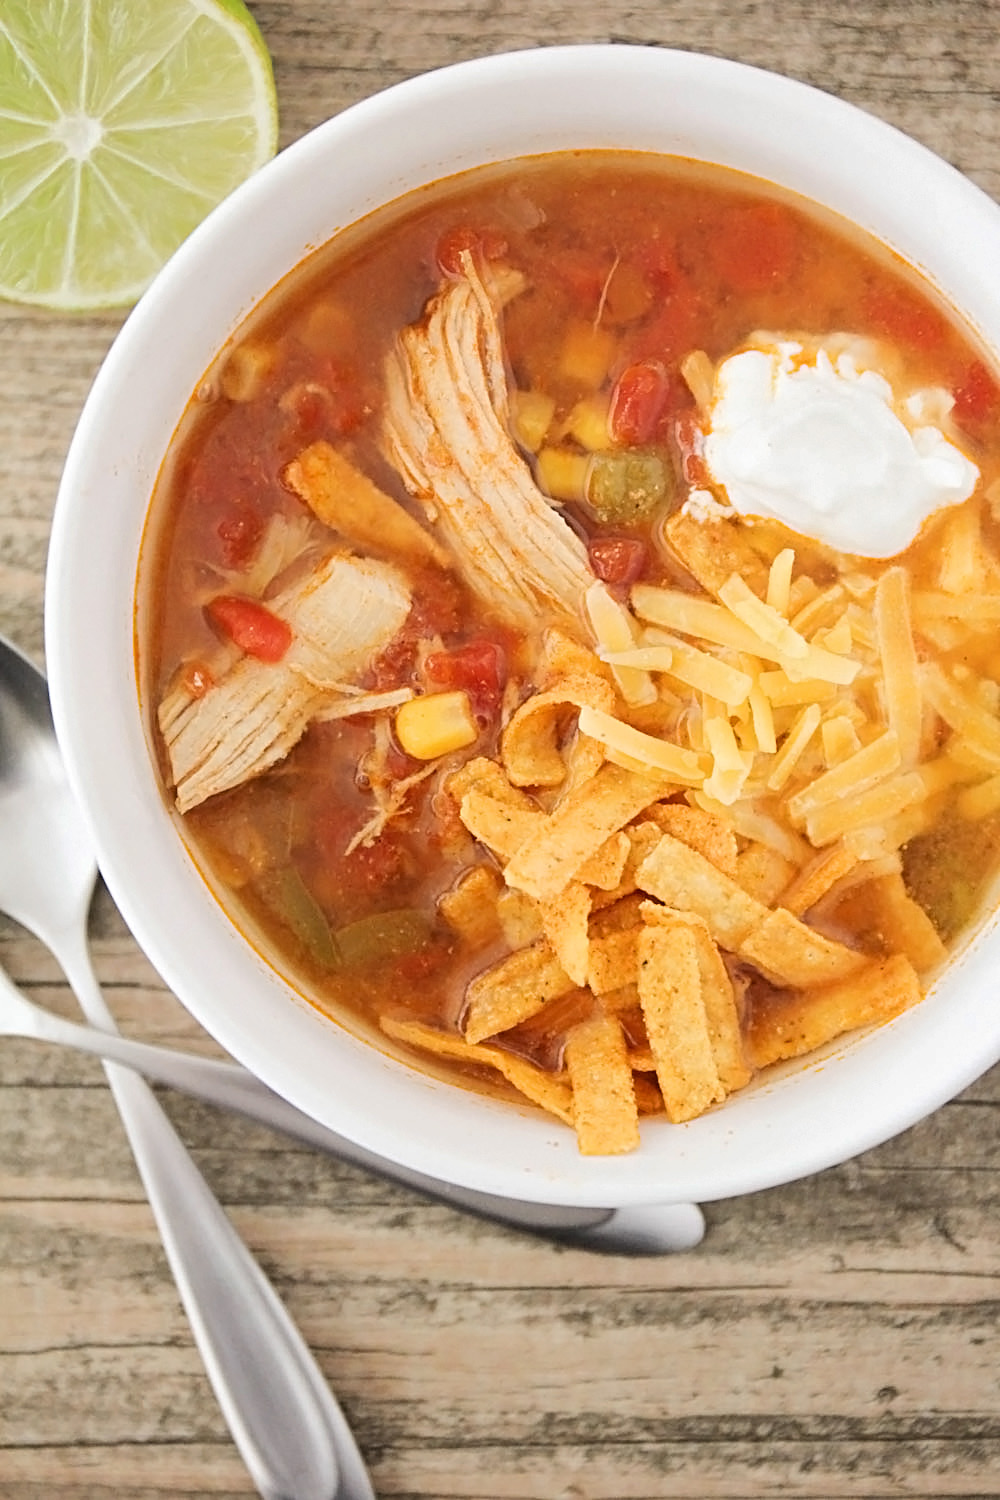 This Instant Pot chicken tortilla soup is incredibly flavorful, and has just a thirty minute cook time! A savory and delicious dinner that's perfect for a busy night. 